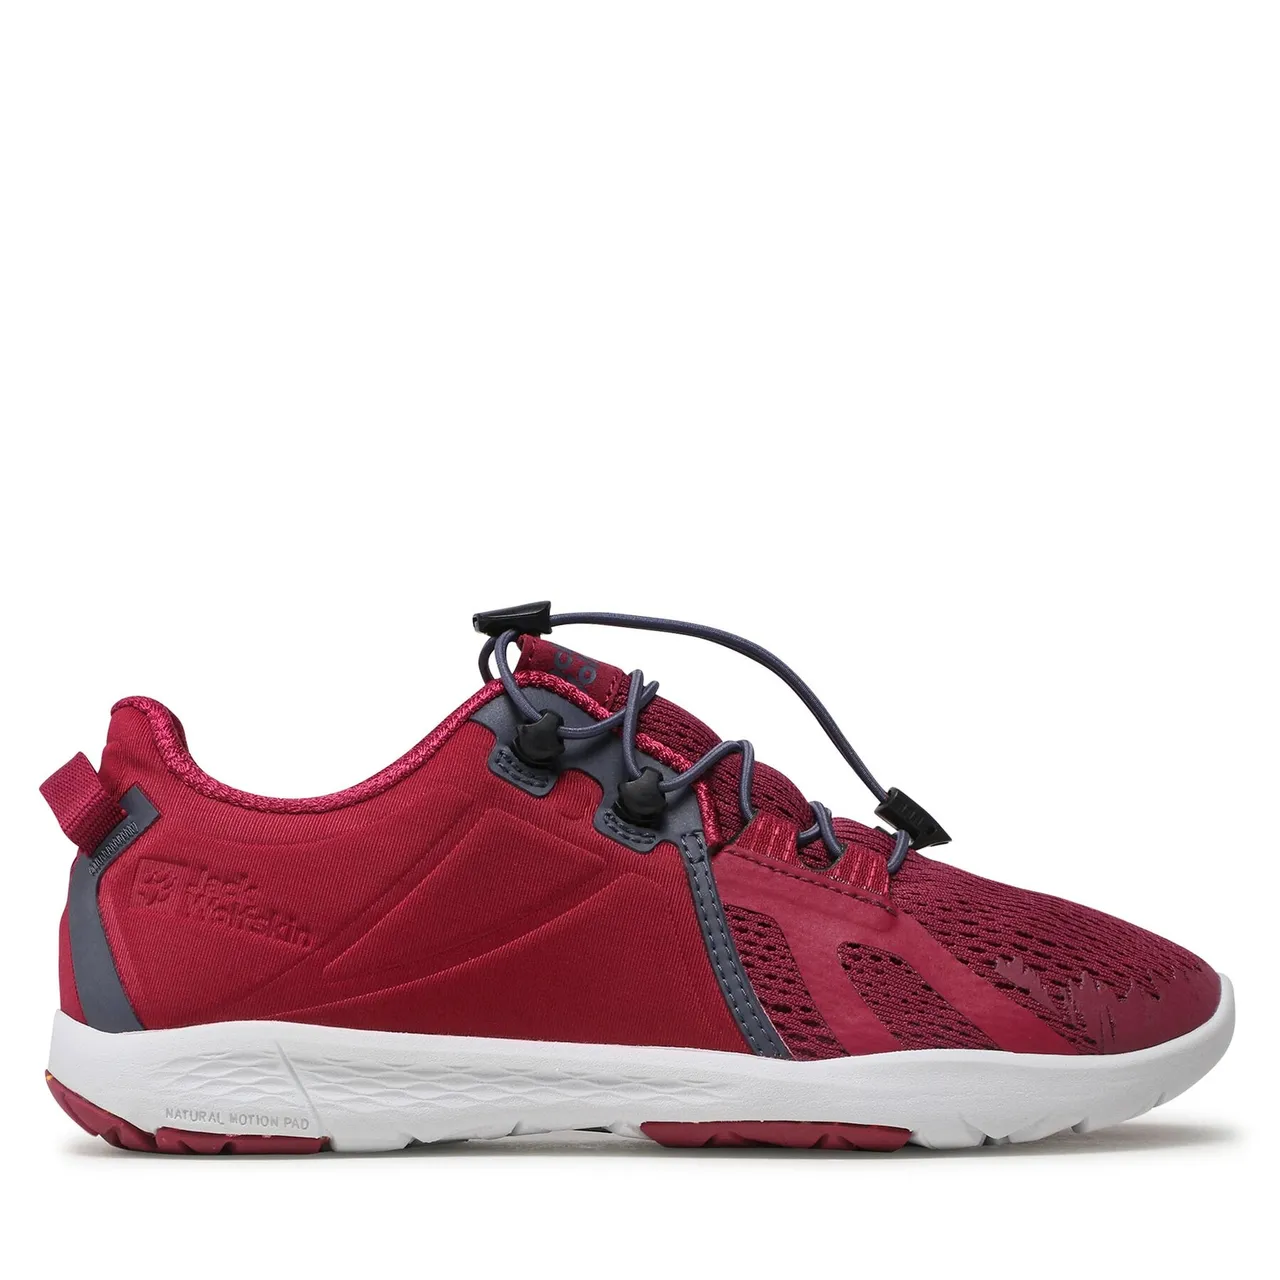 Sneakers Jack Wolfskin Spirit A.D.E Low W 4056291 Sangria Red